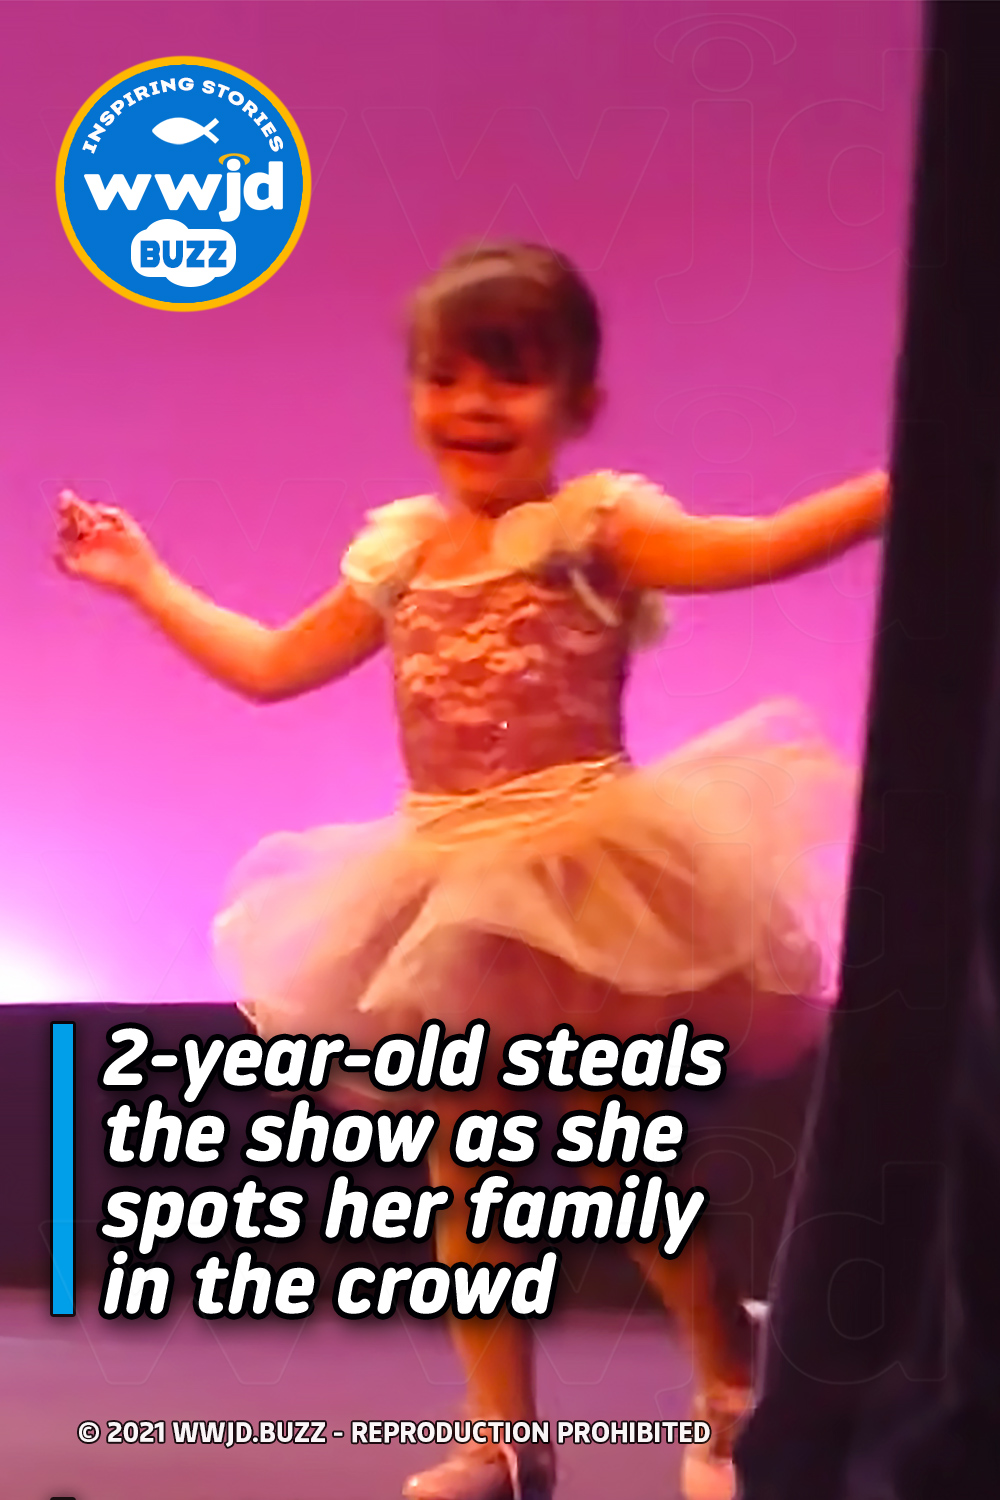 2-year-old steals the show as she spots her family in the crowd